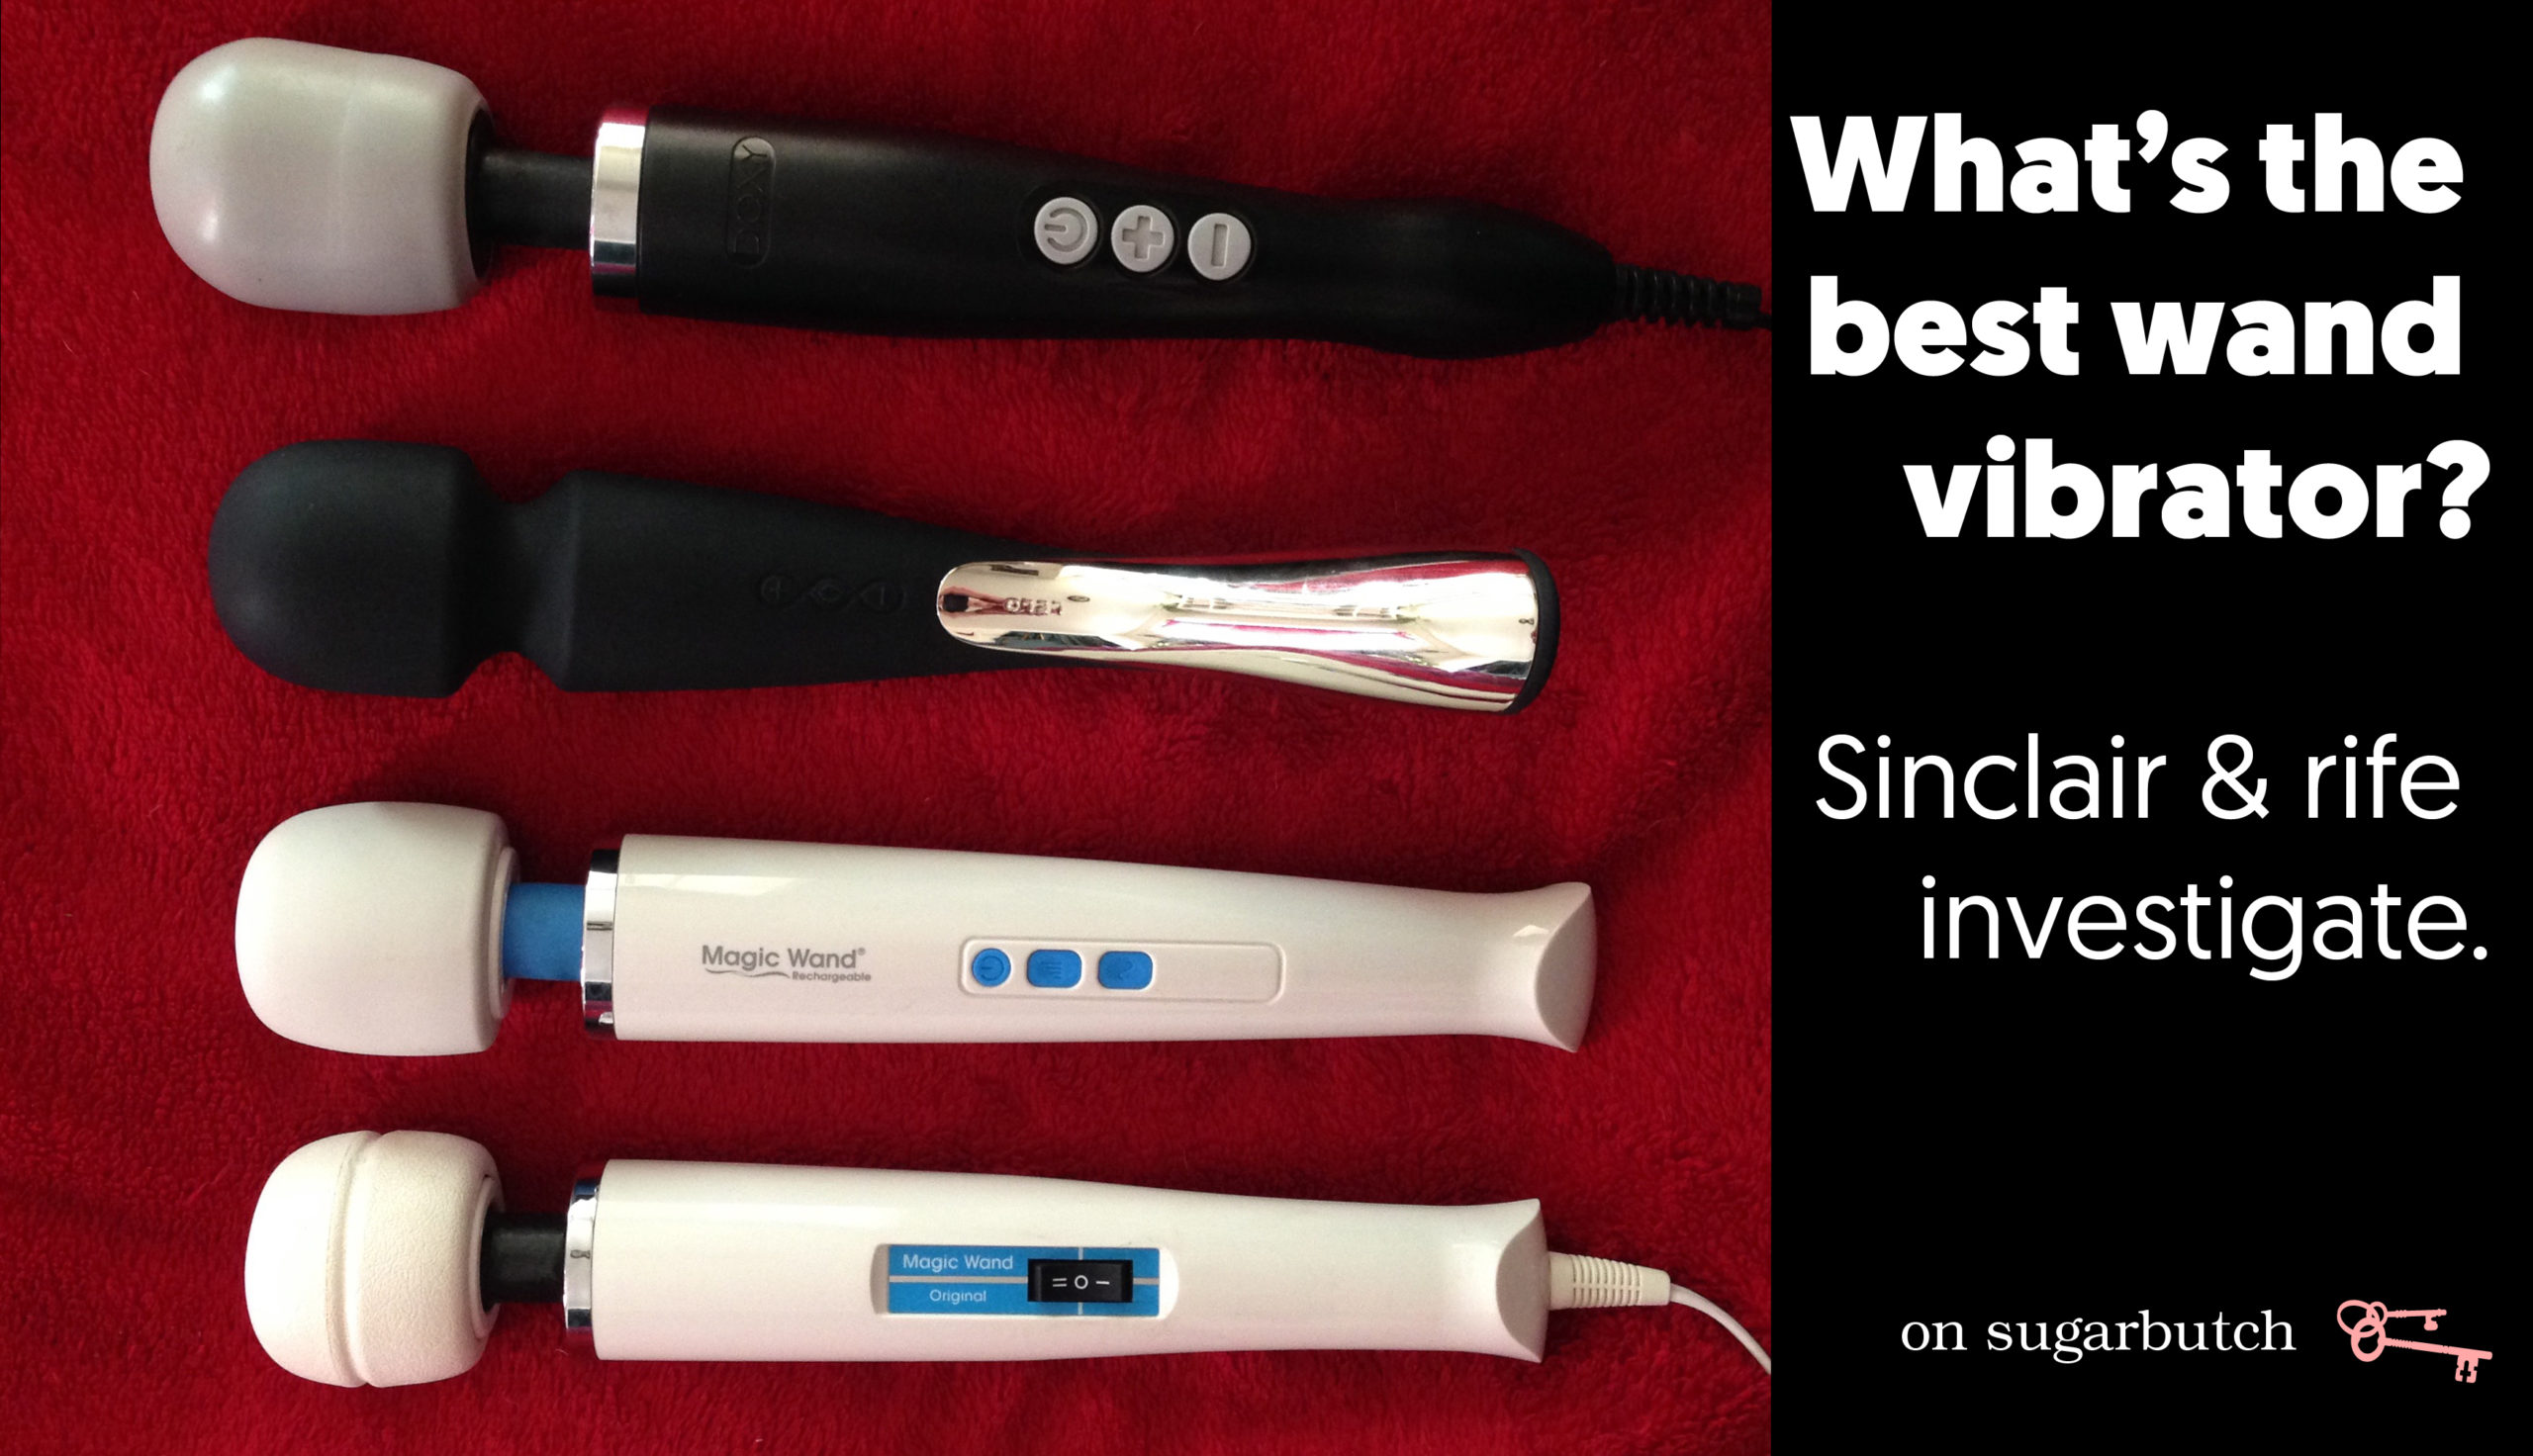 Review: What’s the Best Wand Vibrator?